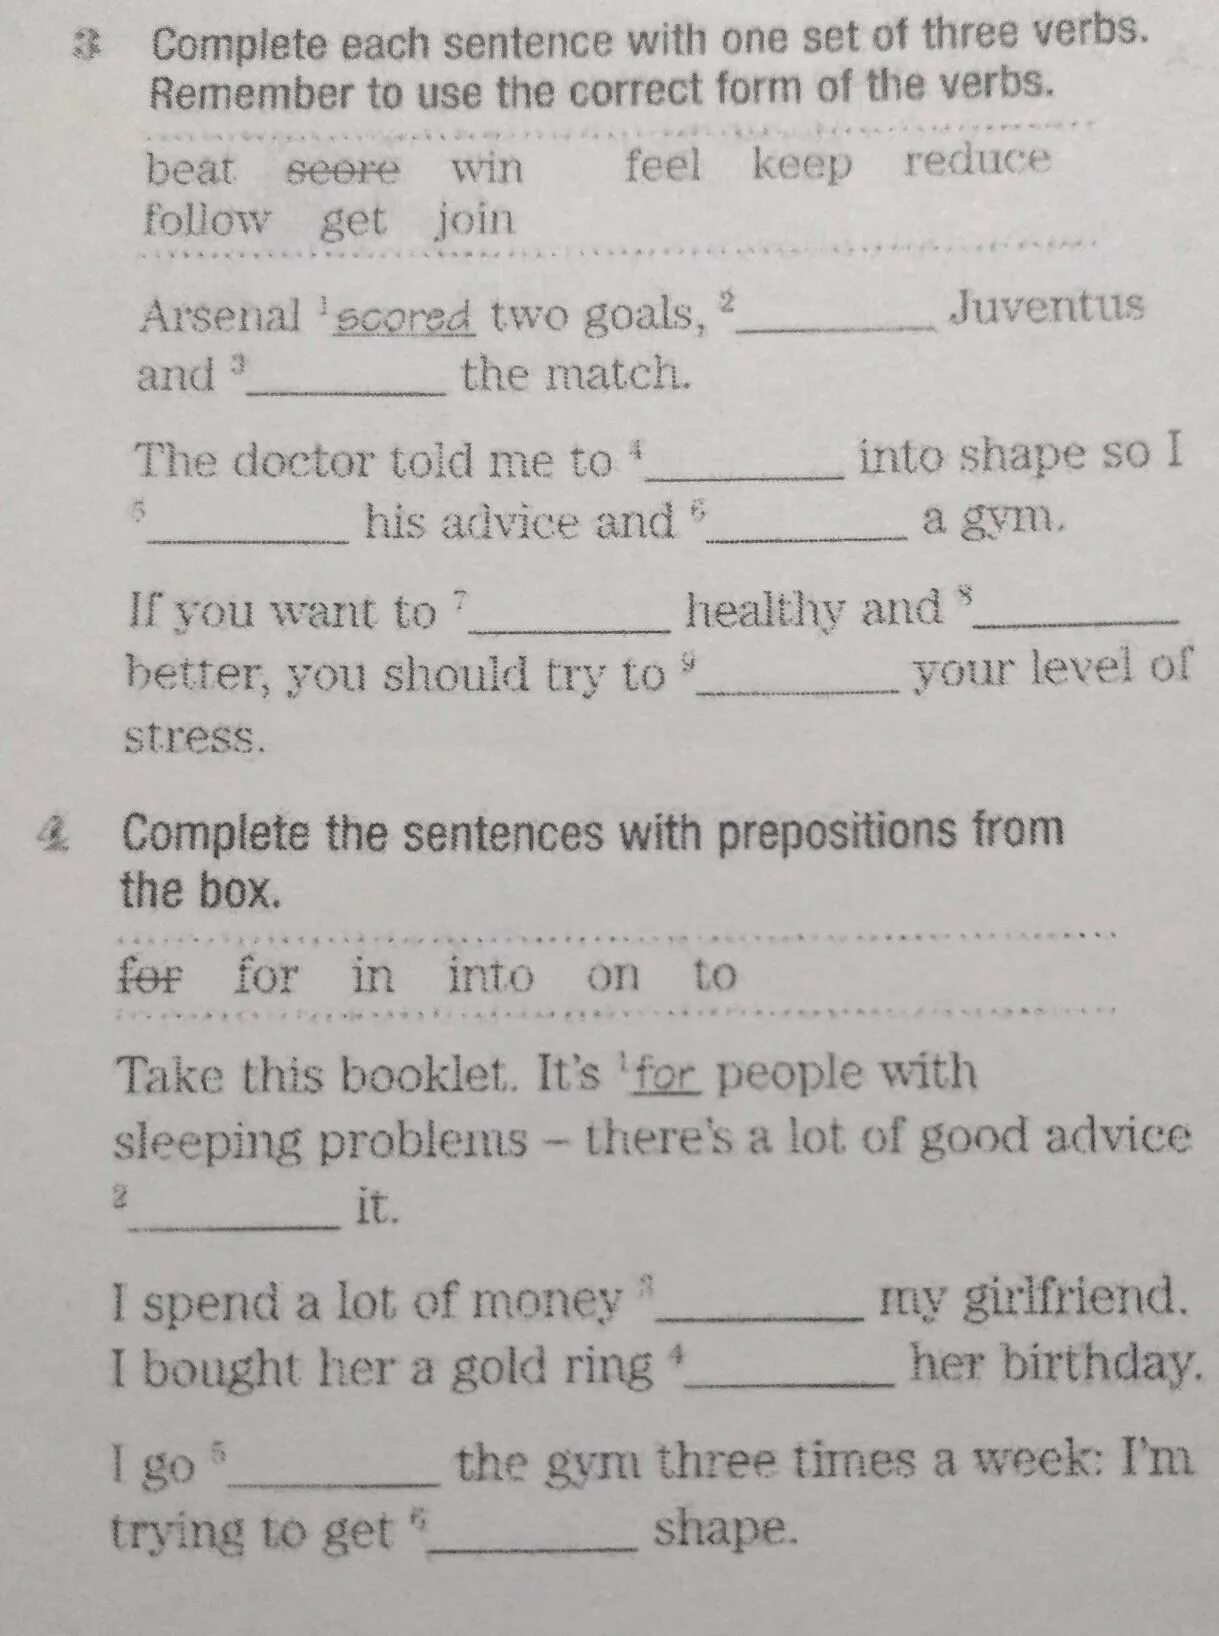 Complete each sentence using. Complete each sentence with one of 8 класс. Use the correct form of the verb to complete each sentence.